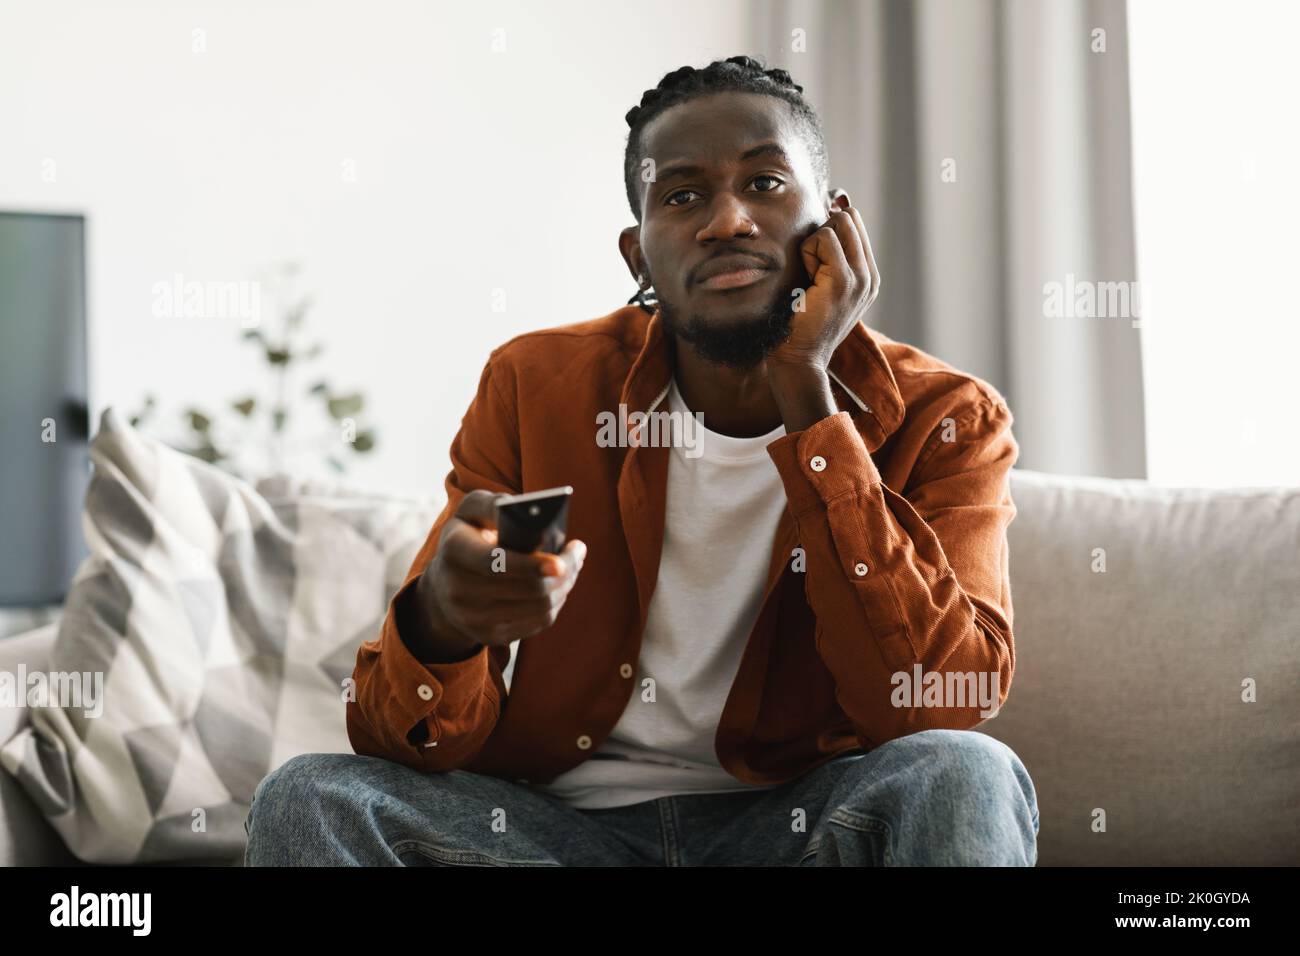 Boring television program. Bored upset black man watching TV and switching channels with remote control, sitting on sofa Stock Photo